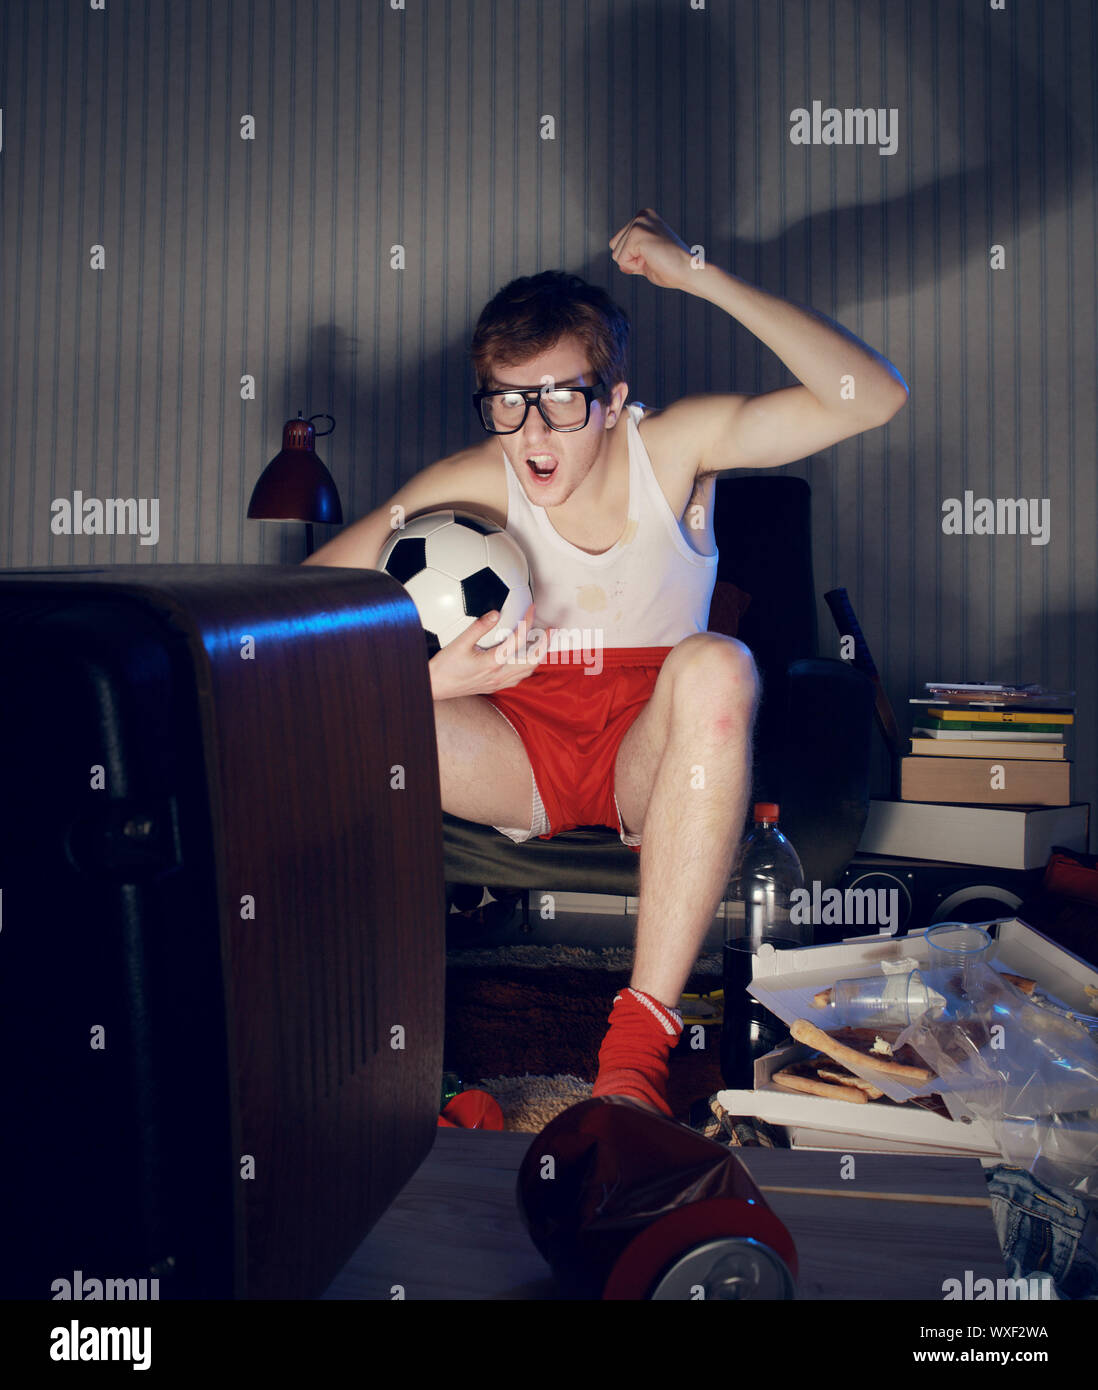 Nerd boy excited by goal scored during soccer competition Stock Photo